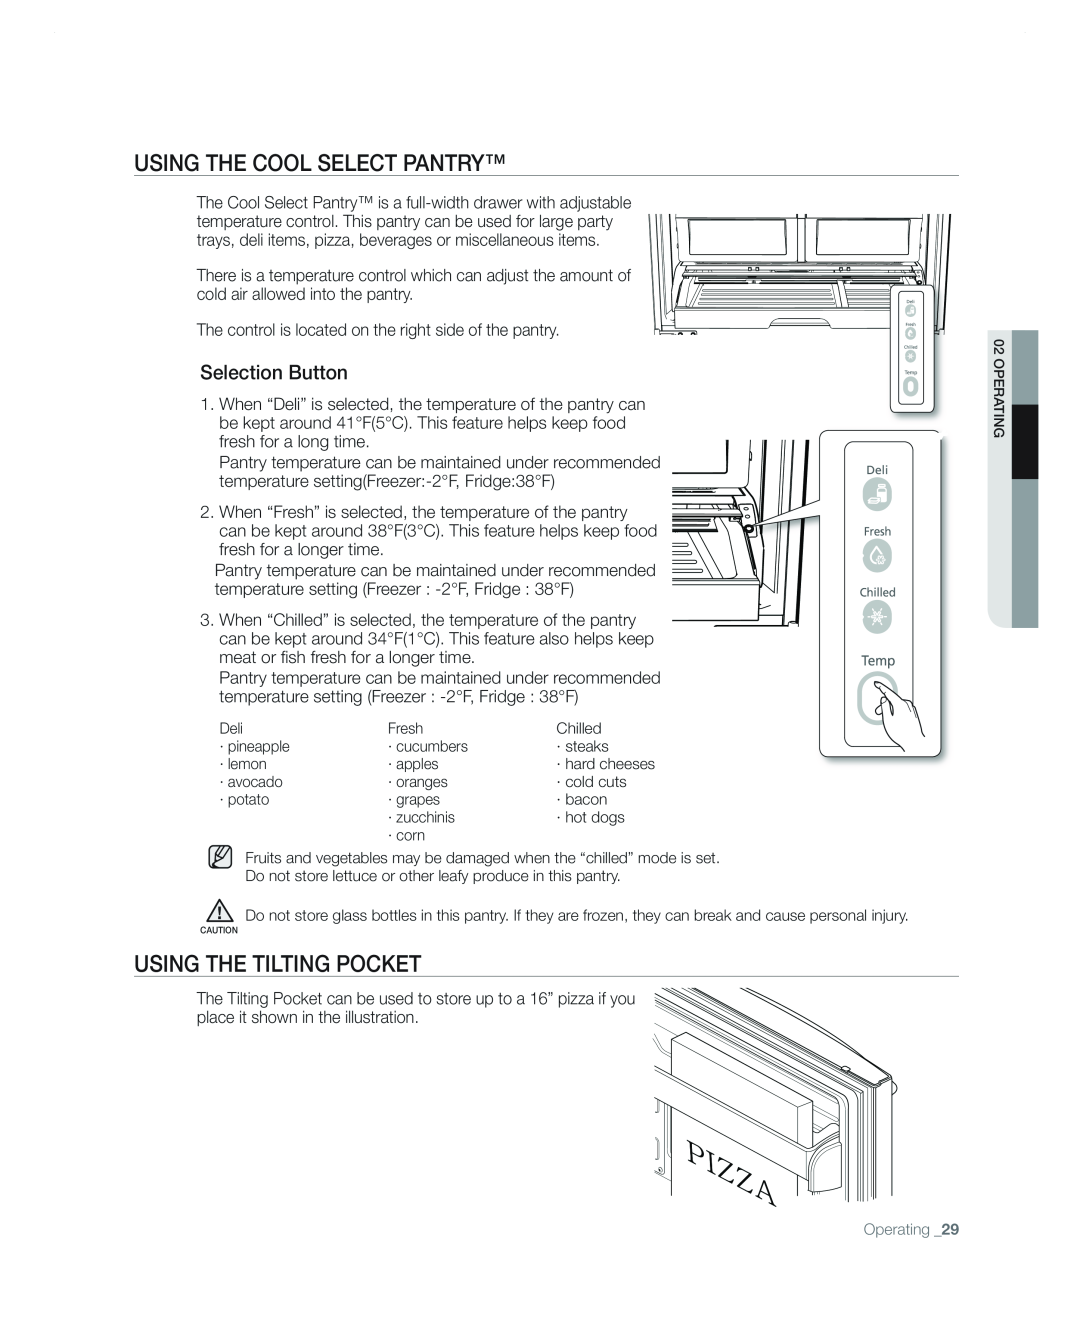 Samsung RF267AA user manual Using The Cool Select Pantry, USING the tilting pocket, Selection Button 